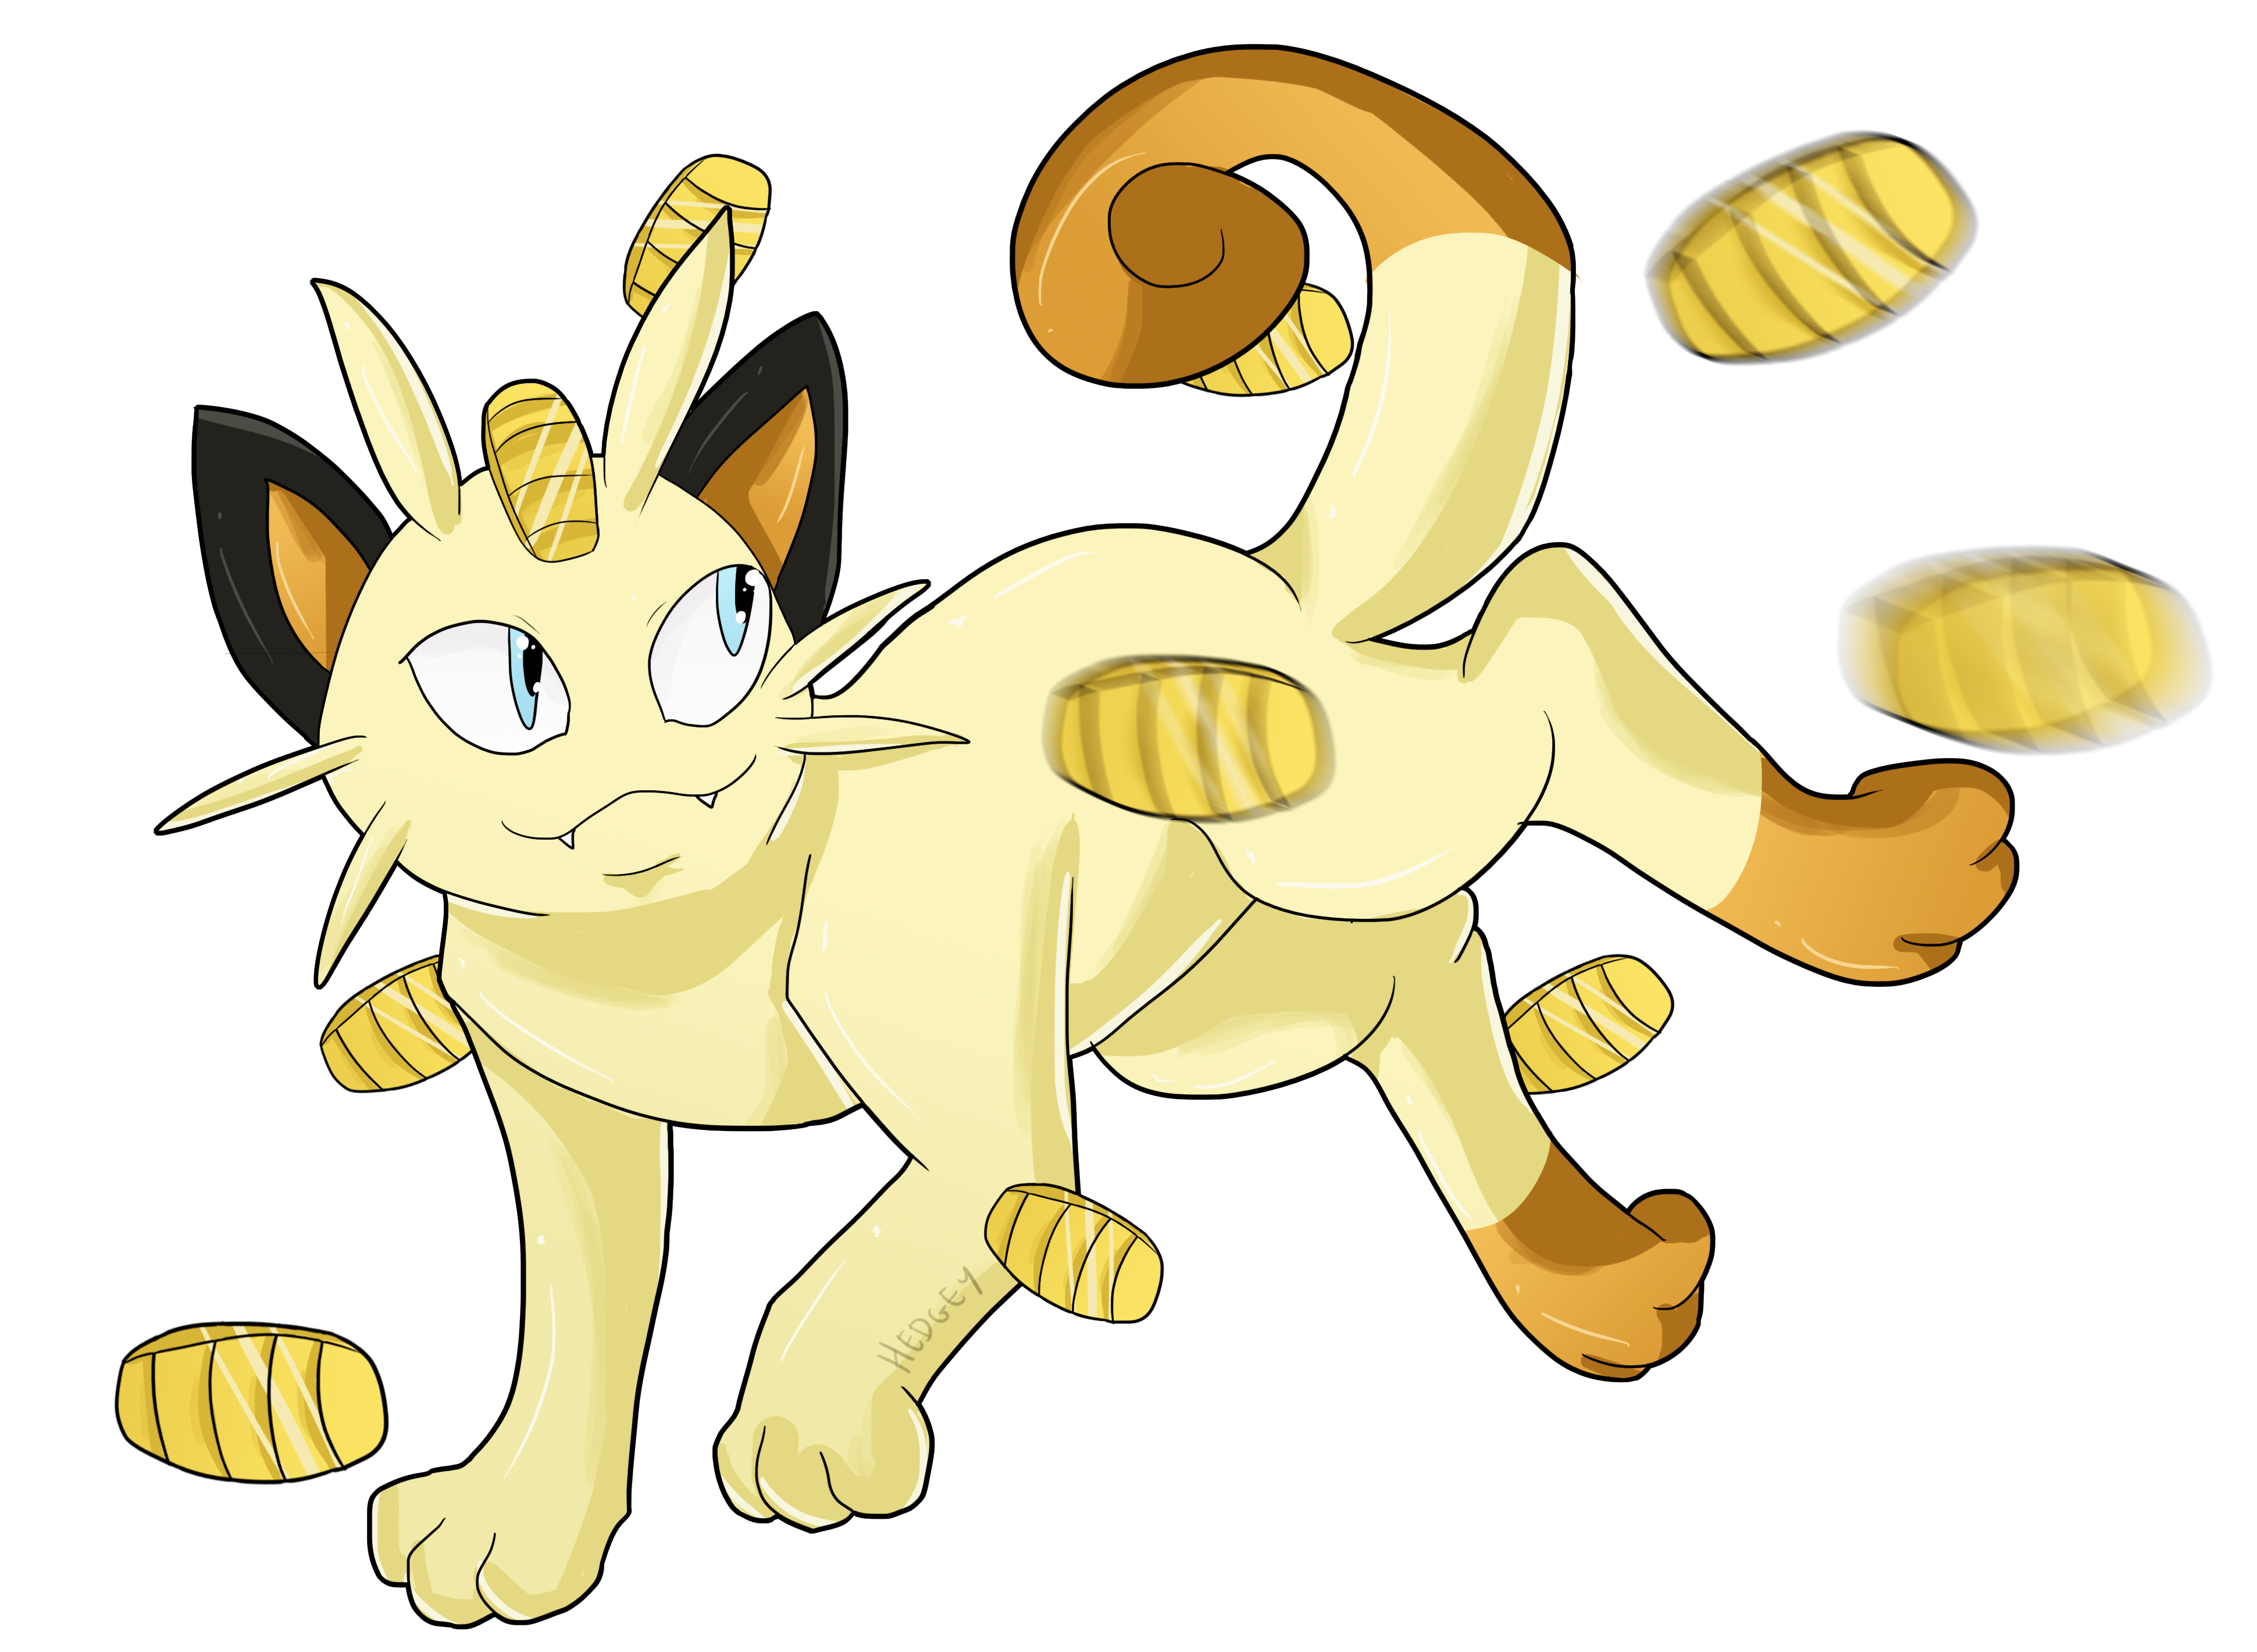 meowth-used-payday-pokemon-art-tribute-on-game-art-hq-by-hedgey